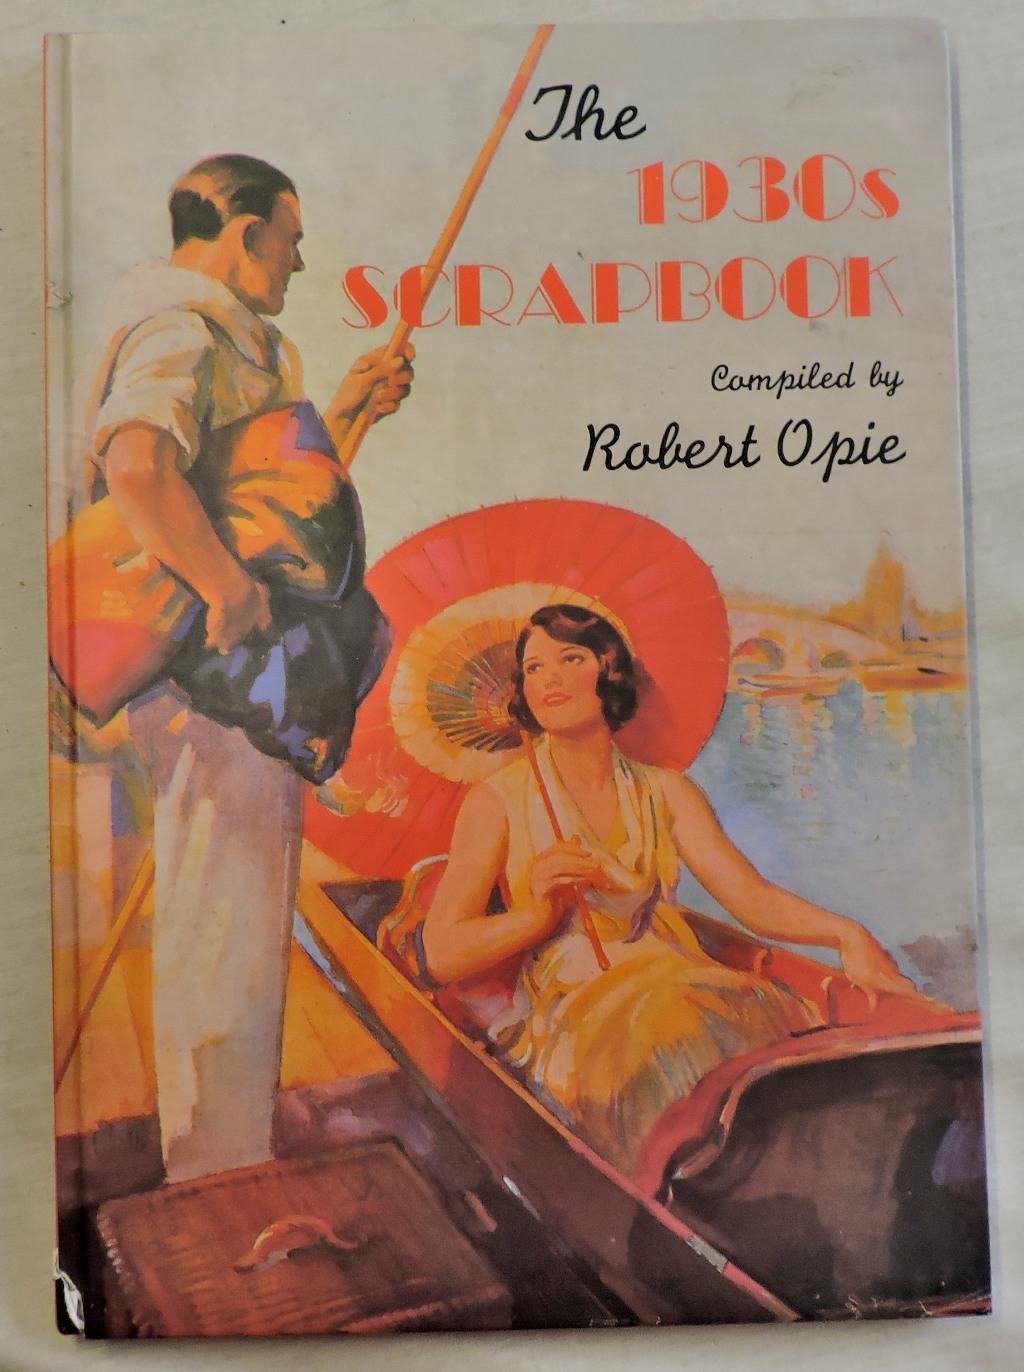 1930's-Scrapbook-Complited by Robert Opie-this is in excellent condition